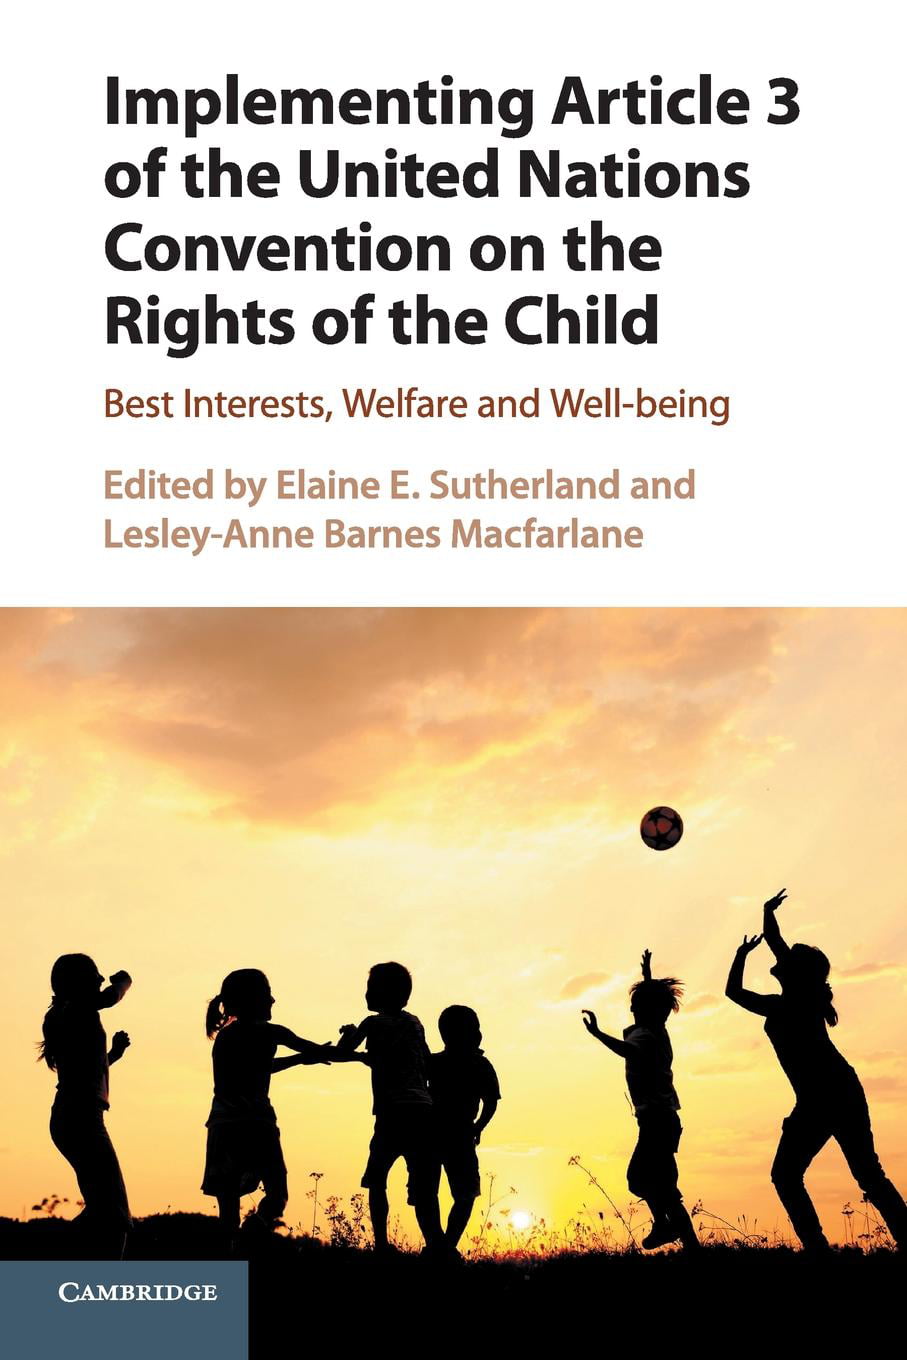 Convention on the rights of the child - pasatune